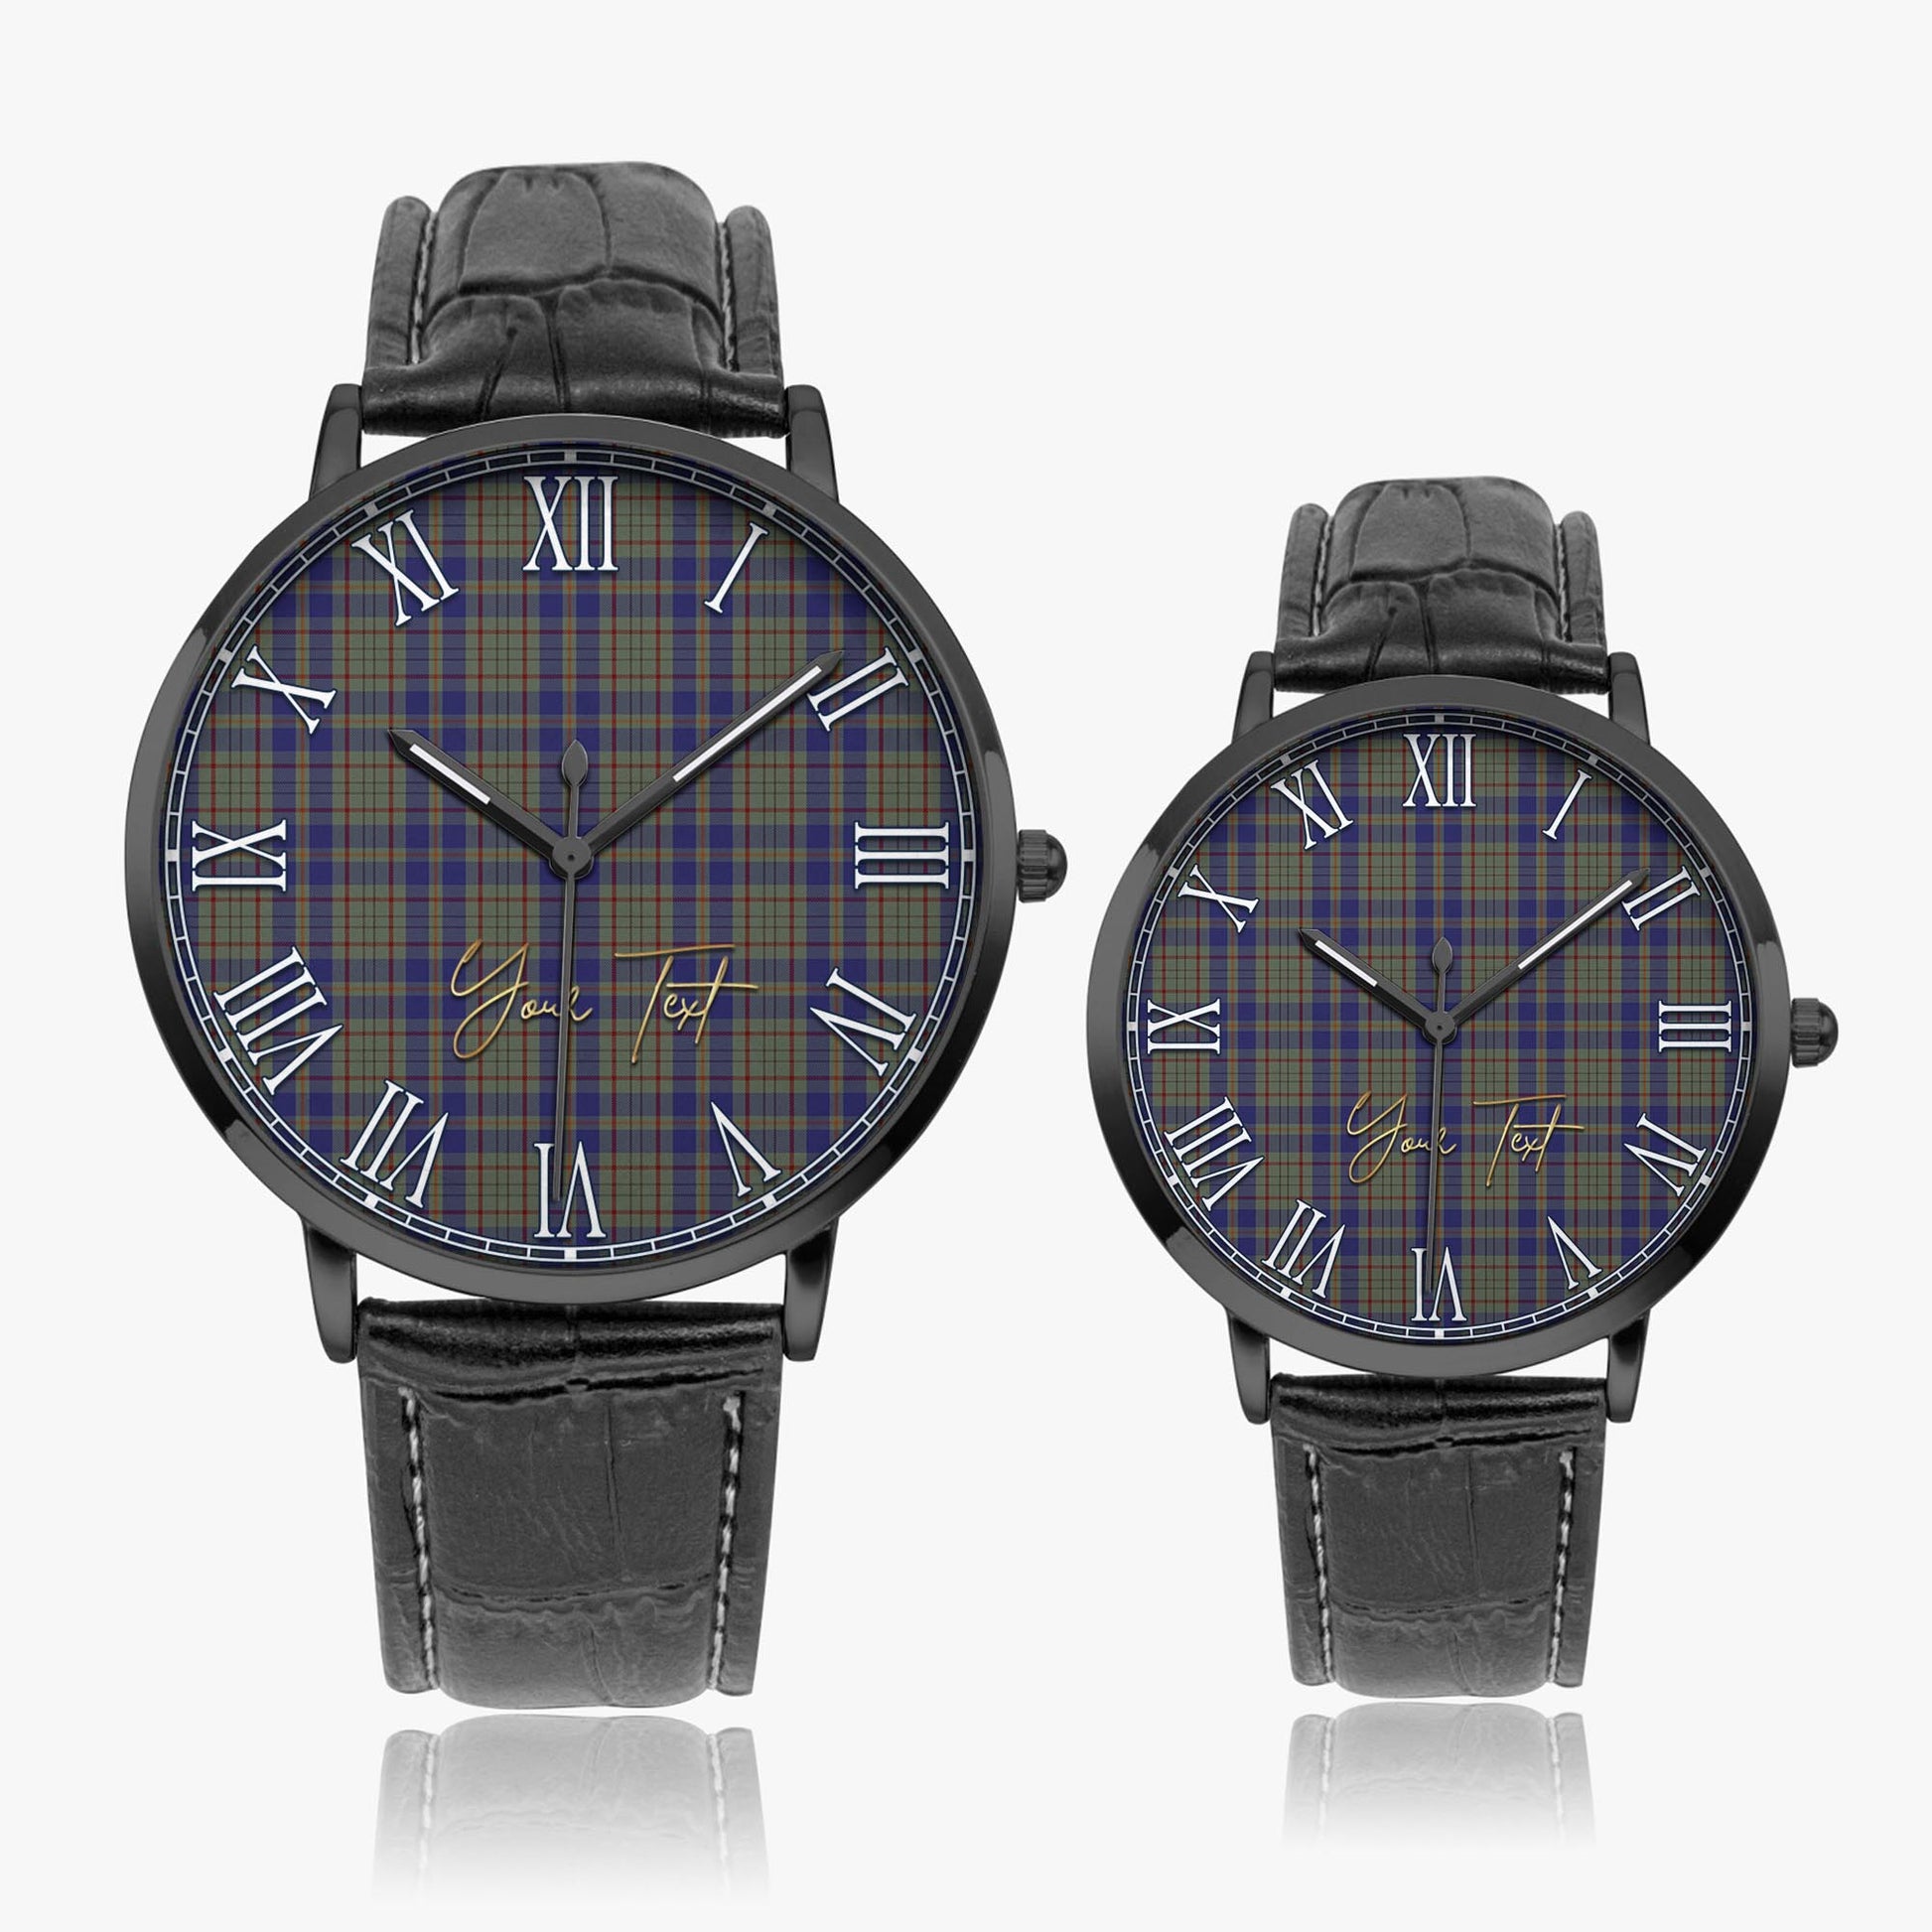 Kildare County Ireland Tartan Personalized Your Text Leather Trap Quartz Watch Ultra Thin Black Case With Black Leather Strap - Tartanvibesclothing